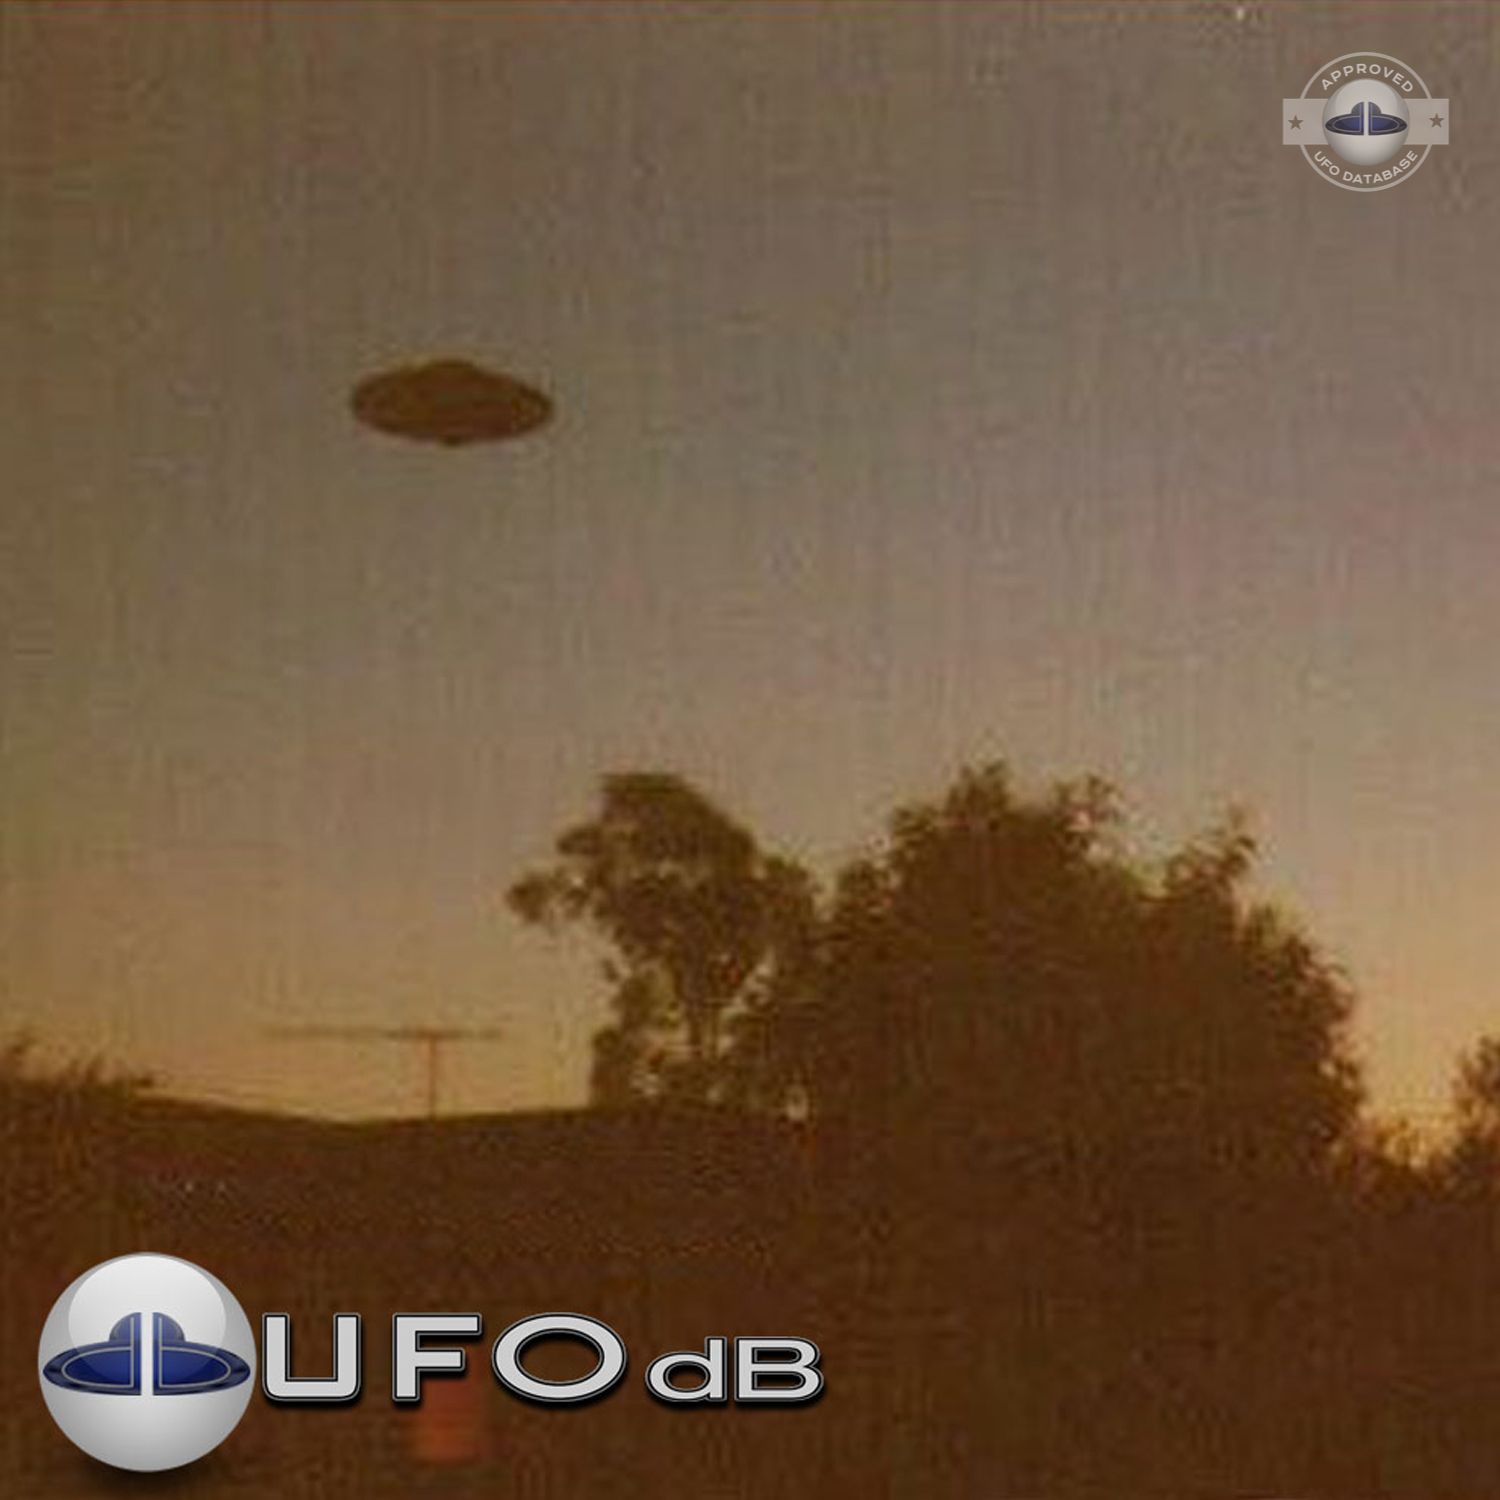 The UFO has a Saturn shape and can be seen at nightfall over a house UFO Picture #65-2